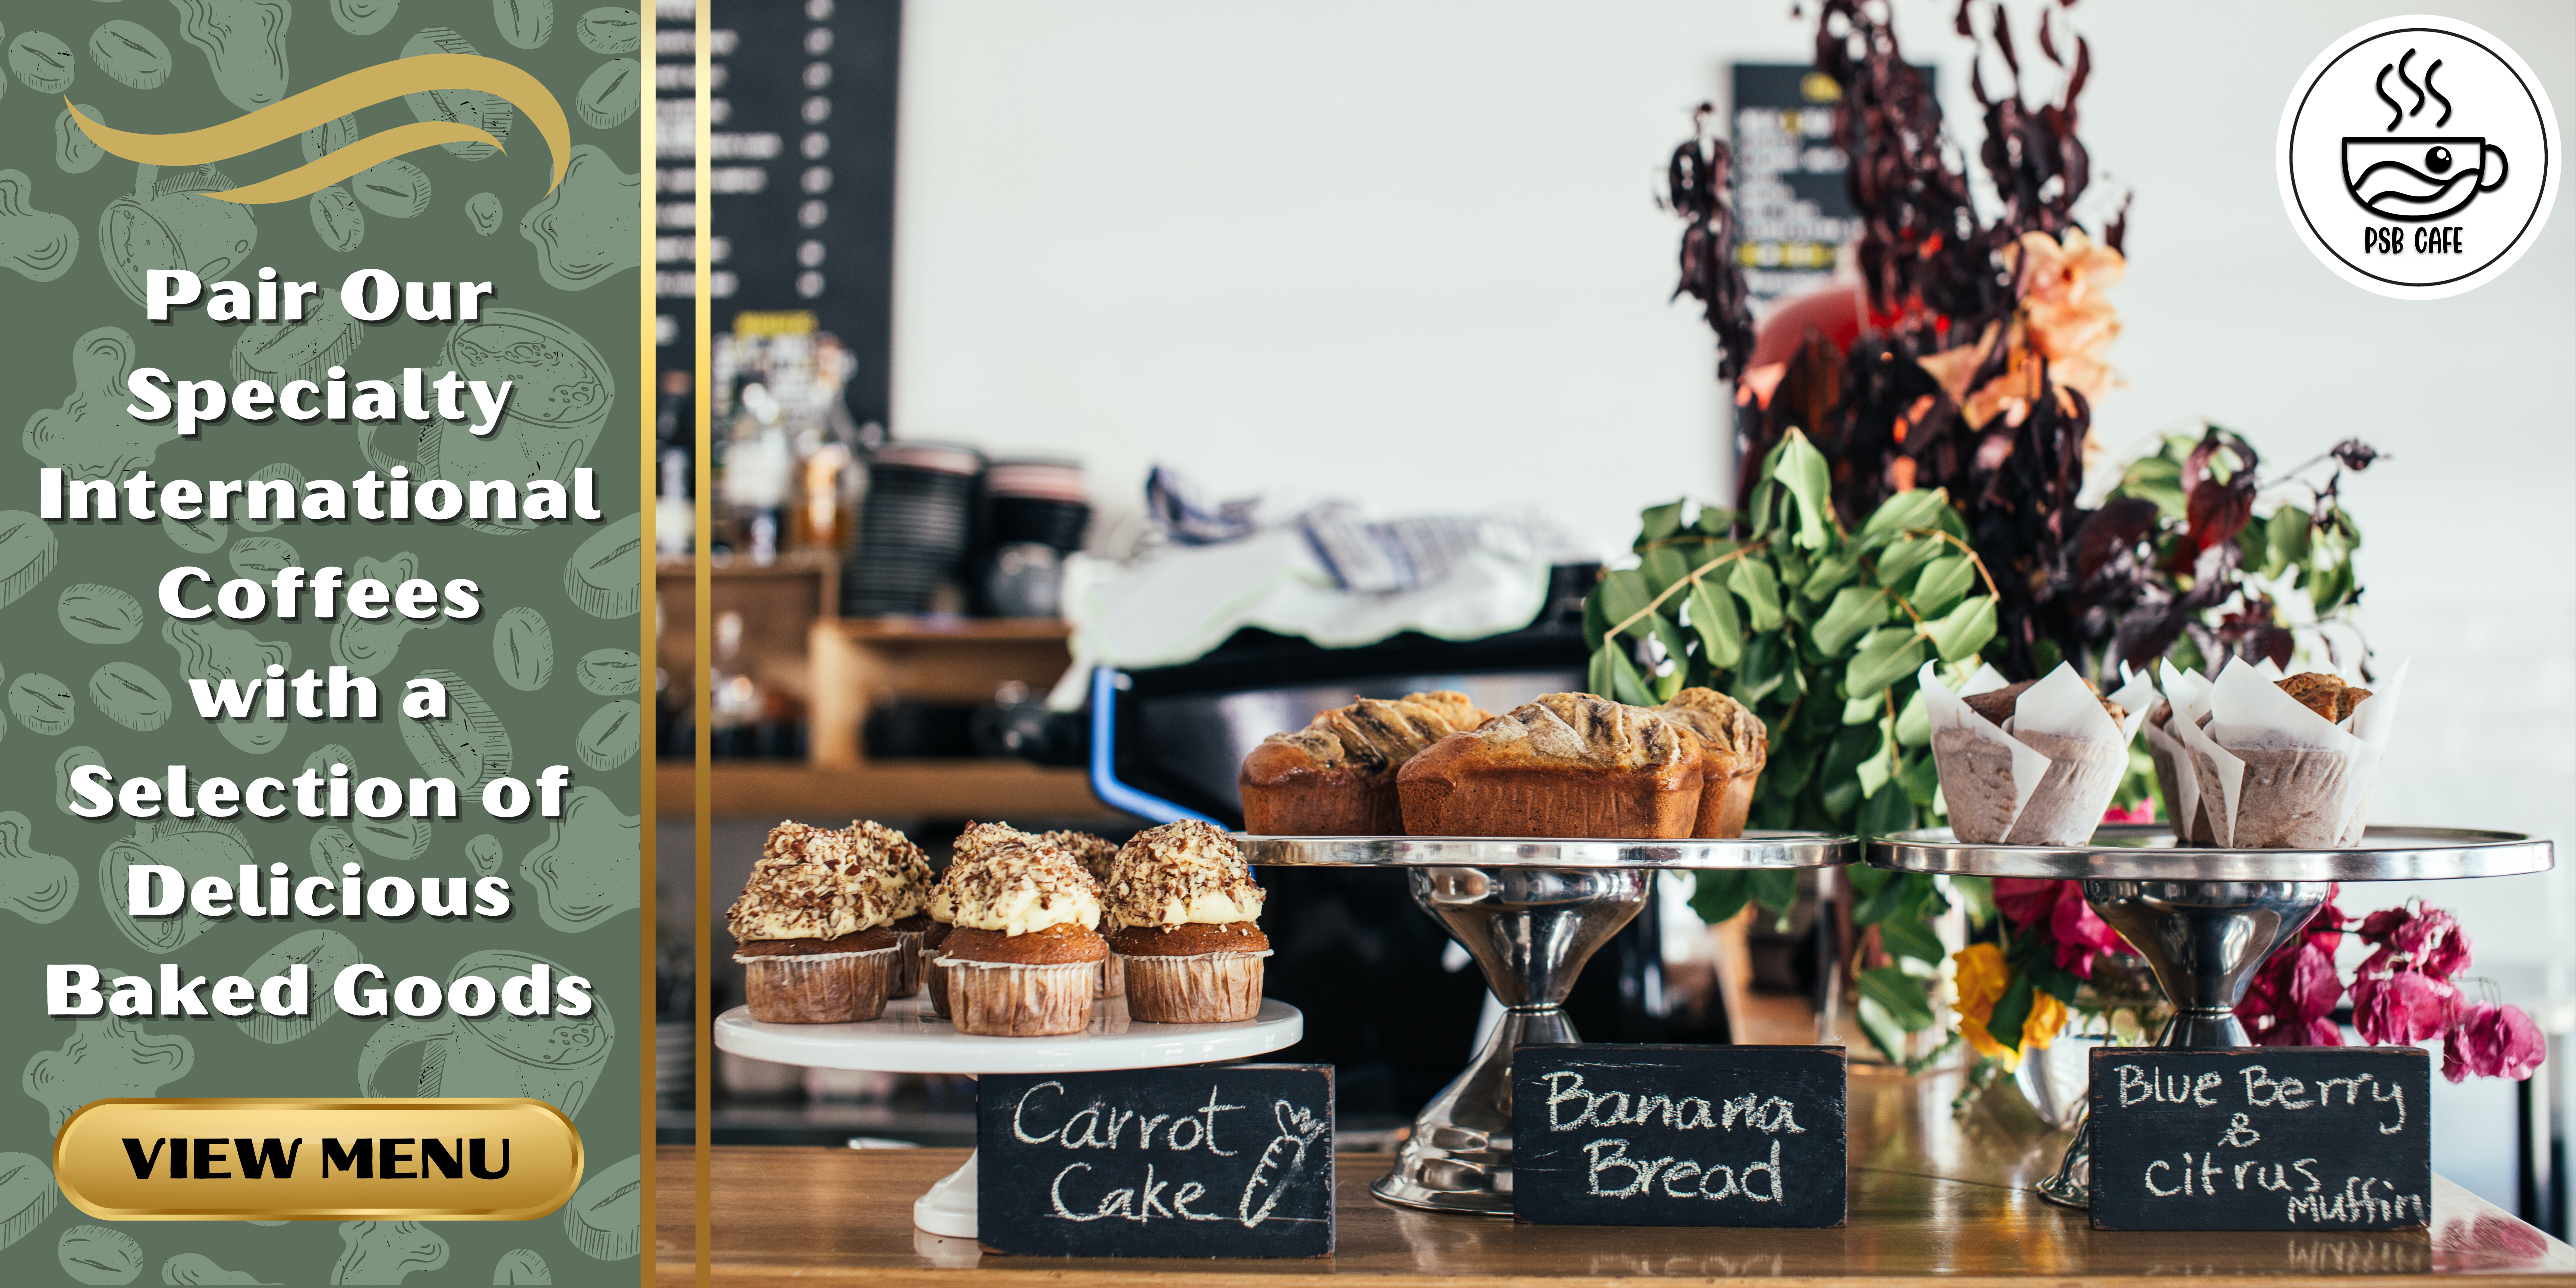 A banner depicting baked goods sold at PSB Cafe: An international coffee connoisseurs cafe in Mississauga.